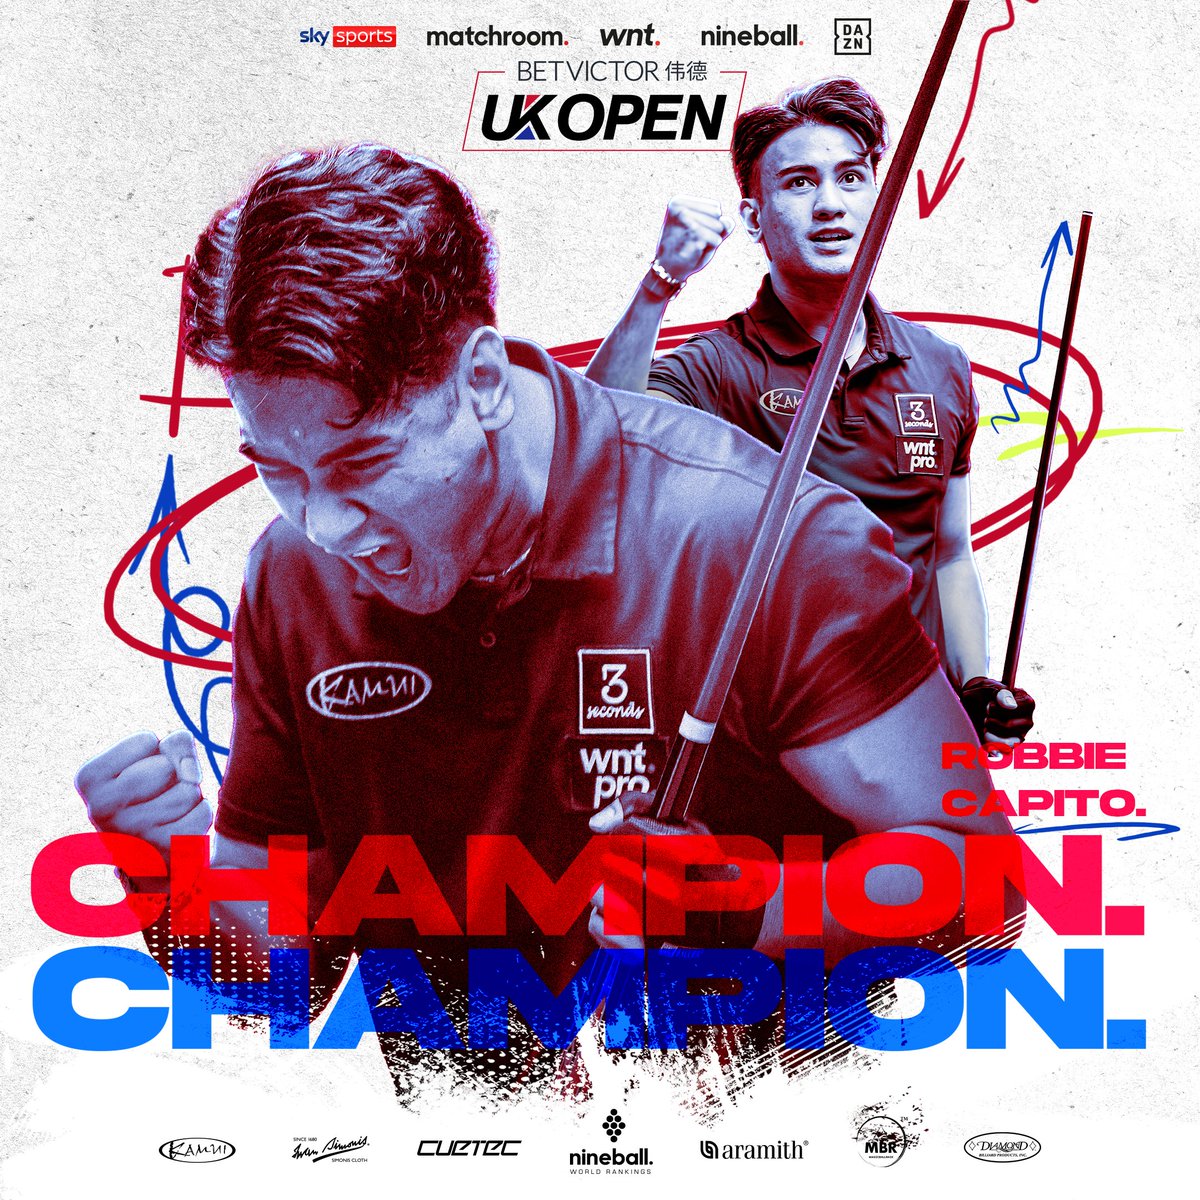 The Pinoy from Hong Kong is shining under the bright lights of the world stage.

Introducing your 2024 UK Open champion...

𝐑𝐎𝐁𝐁𝐈𝐄 𝐂𝐀𝐏𝐈𝐓𝐎 🇭🇰🏆

#UKOpenPool 🇬🇧